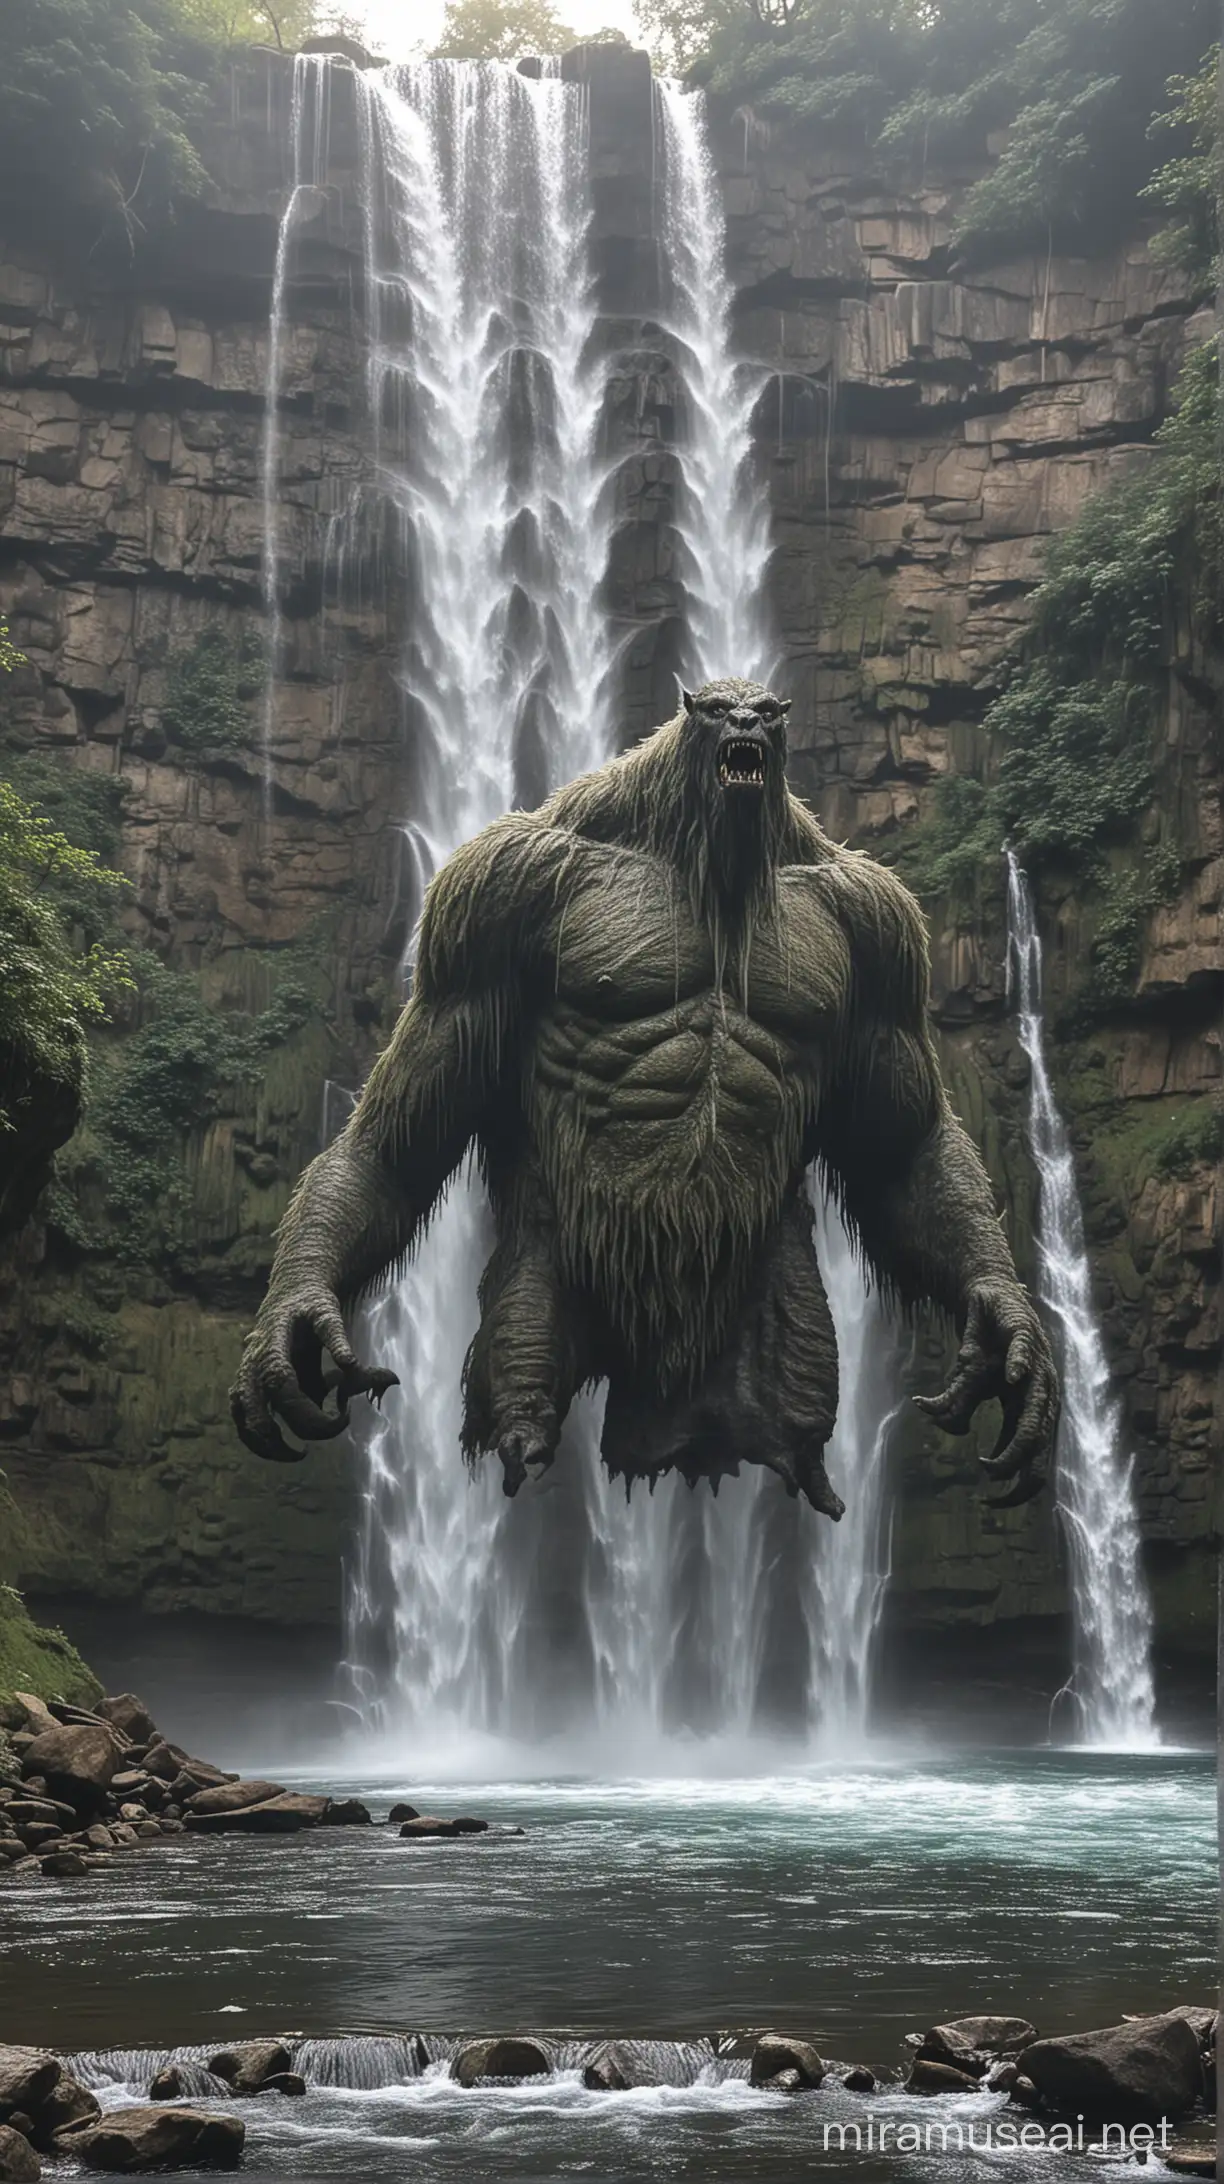 Enormous Monster Emerging from Waterfall